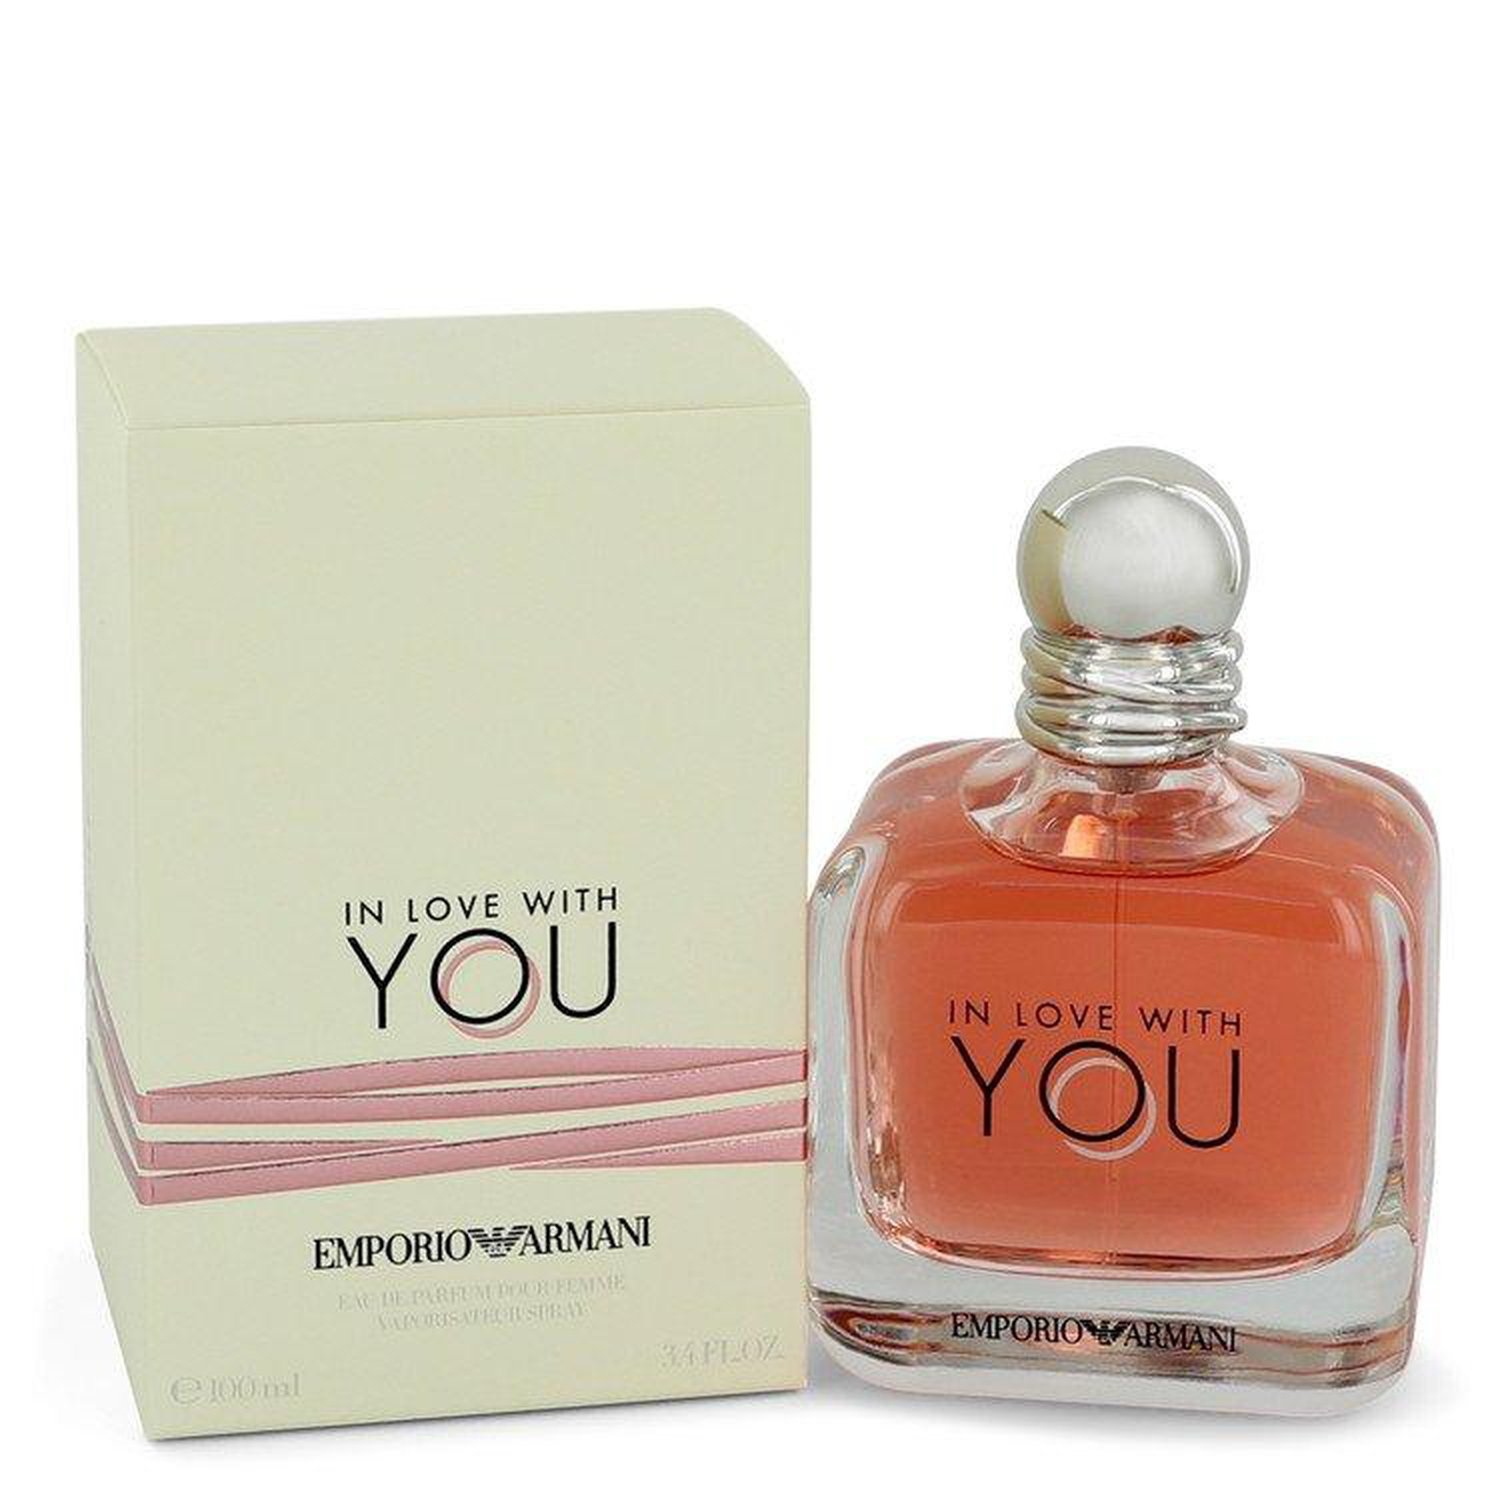 Emporio Armani In Love With You by Giorgio Armani for women EDP for her 100ml